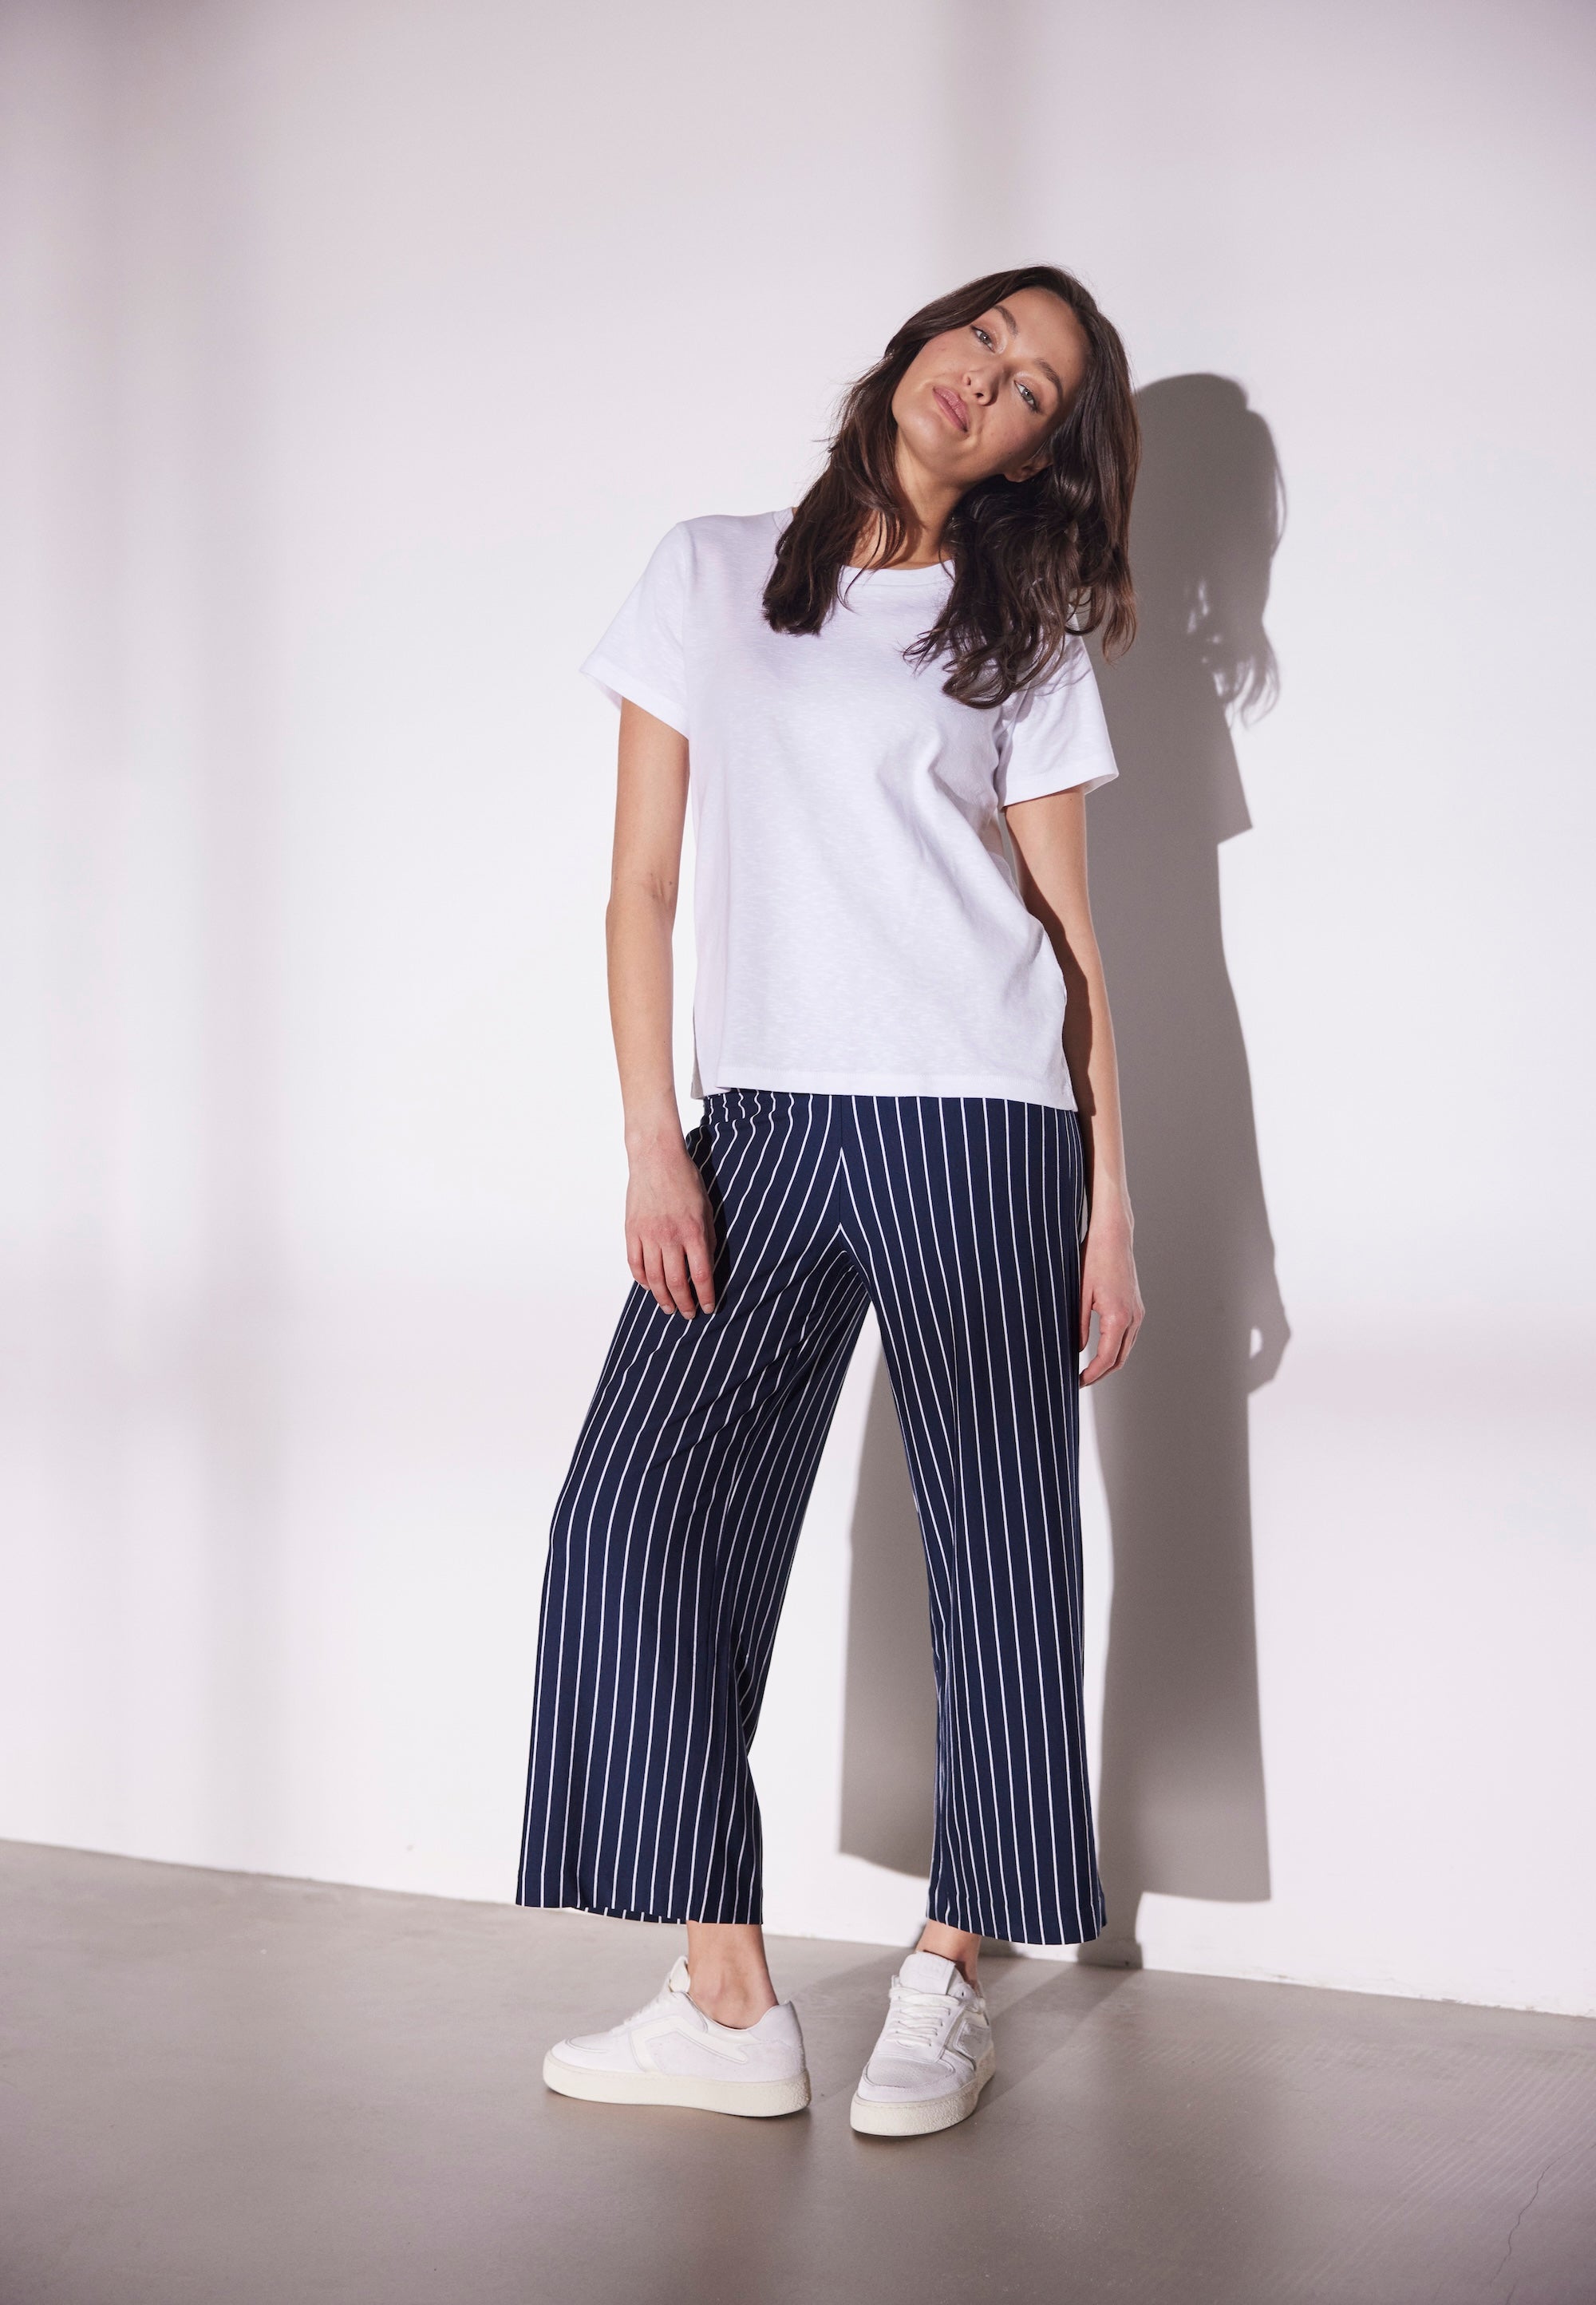 LAURIE Donna Loose Crop Trousers LOOSE 49222 Navy Stripe